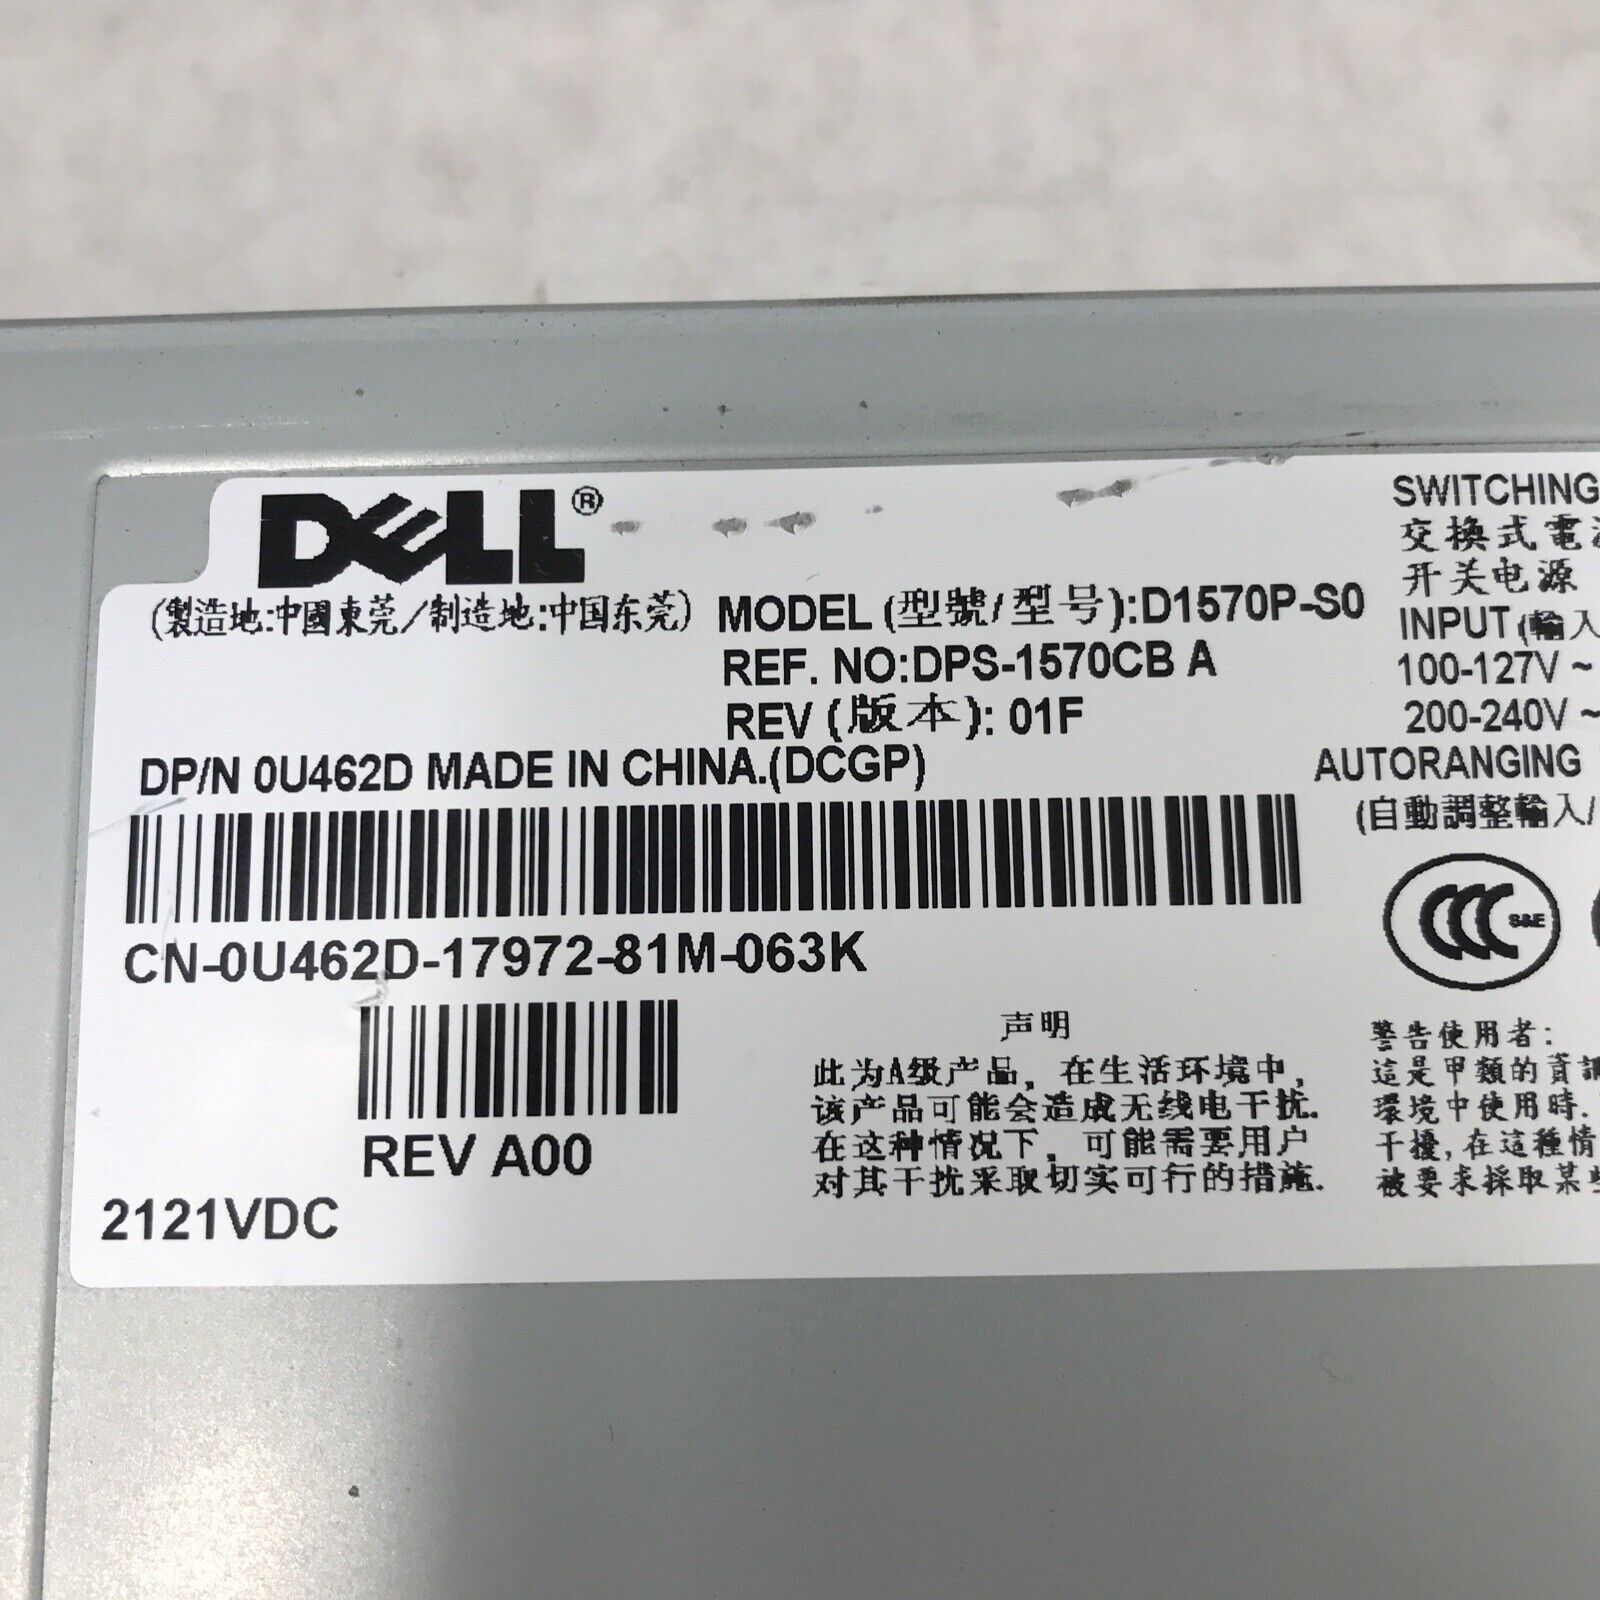 Dell U462D 1570W DPS-1570CB Hot Swap Power Supply for Dell Poweredge R900